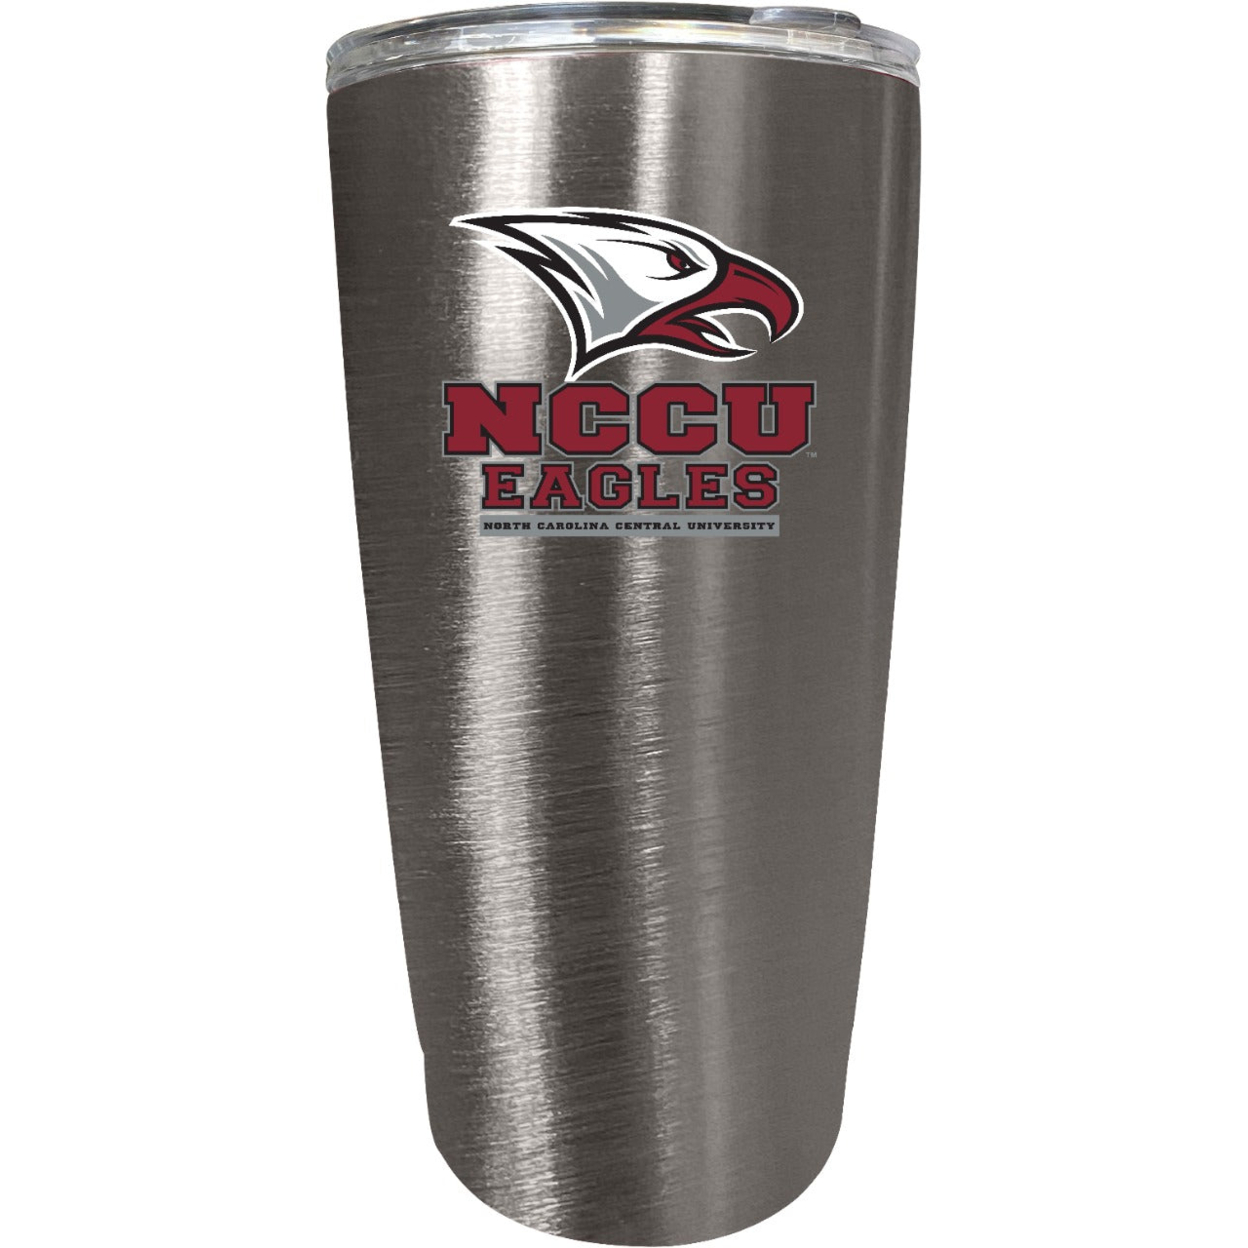 North Carolina Central Eagles 16 Oz Insulated Stainless Steel Tumbler Colorless